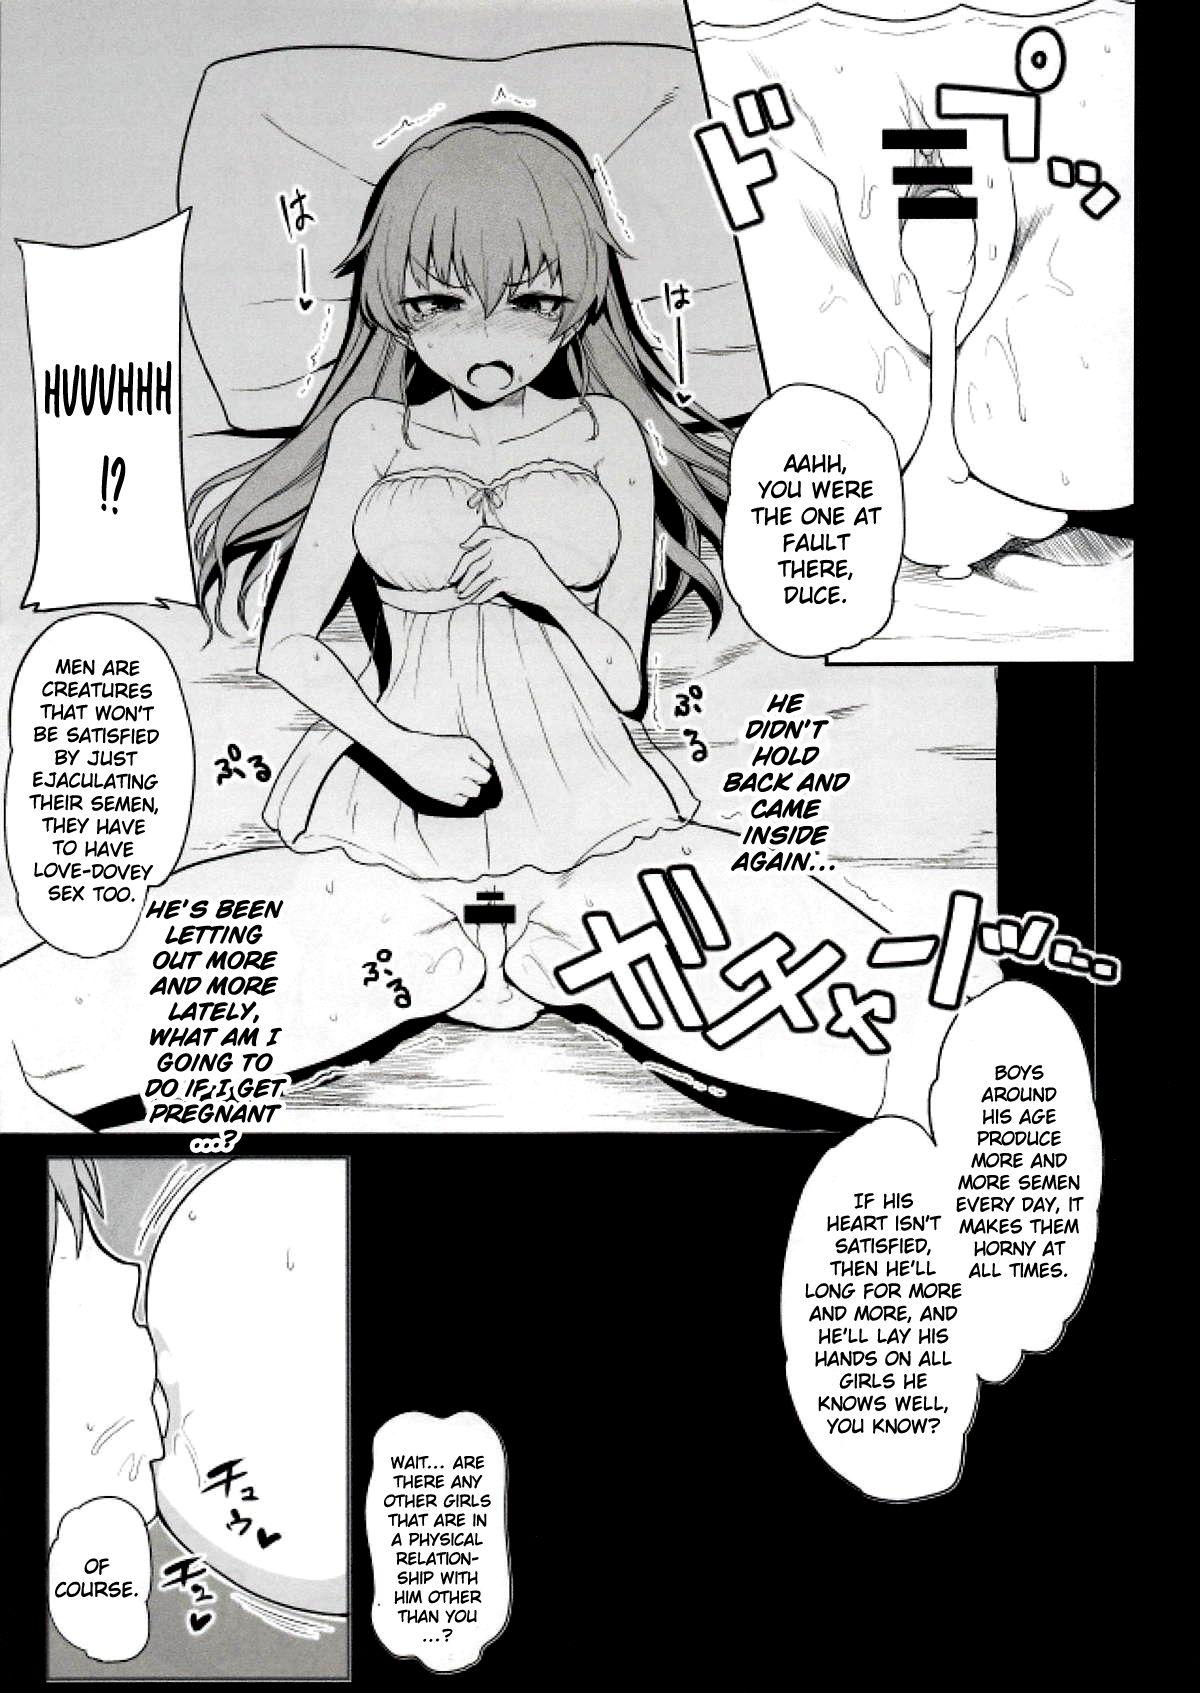 Chaturbate Raise wa Duce no Otouto ni Naritai | I Want To Become Duce's Little Brother In The Future! - Girls und panzer Hood - Page 5